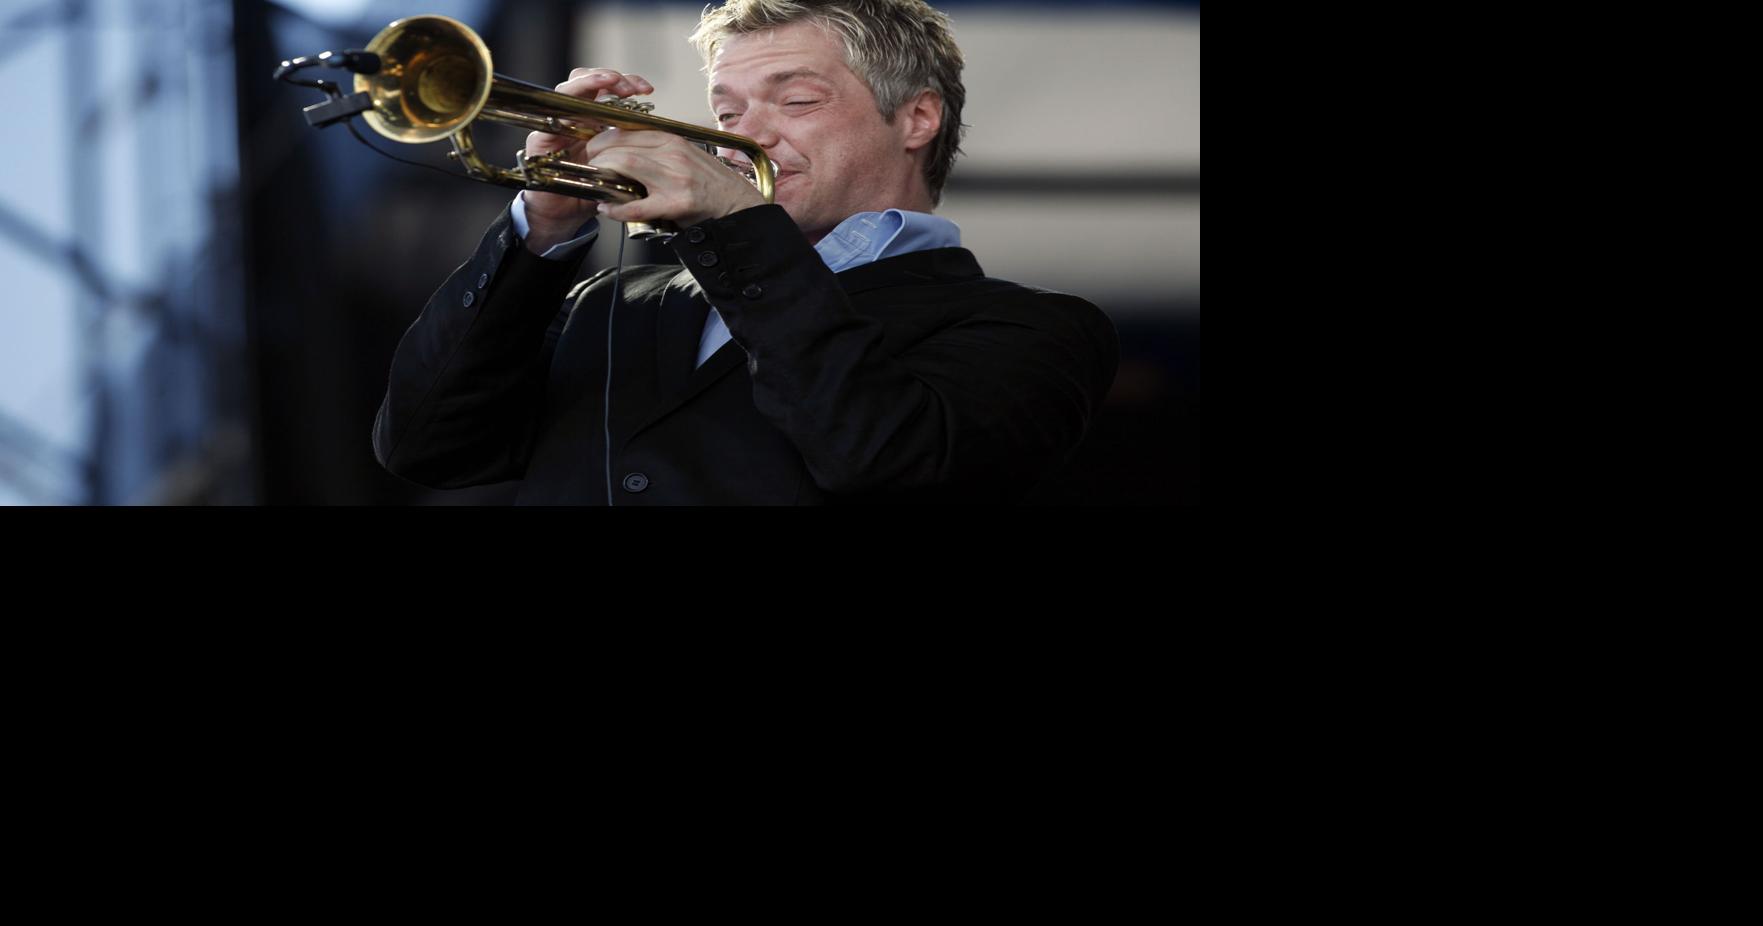 Jazz fest star Chris Botti got rid of his possessions. Here's why